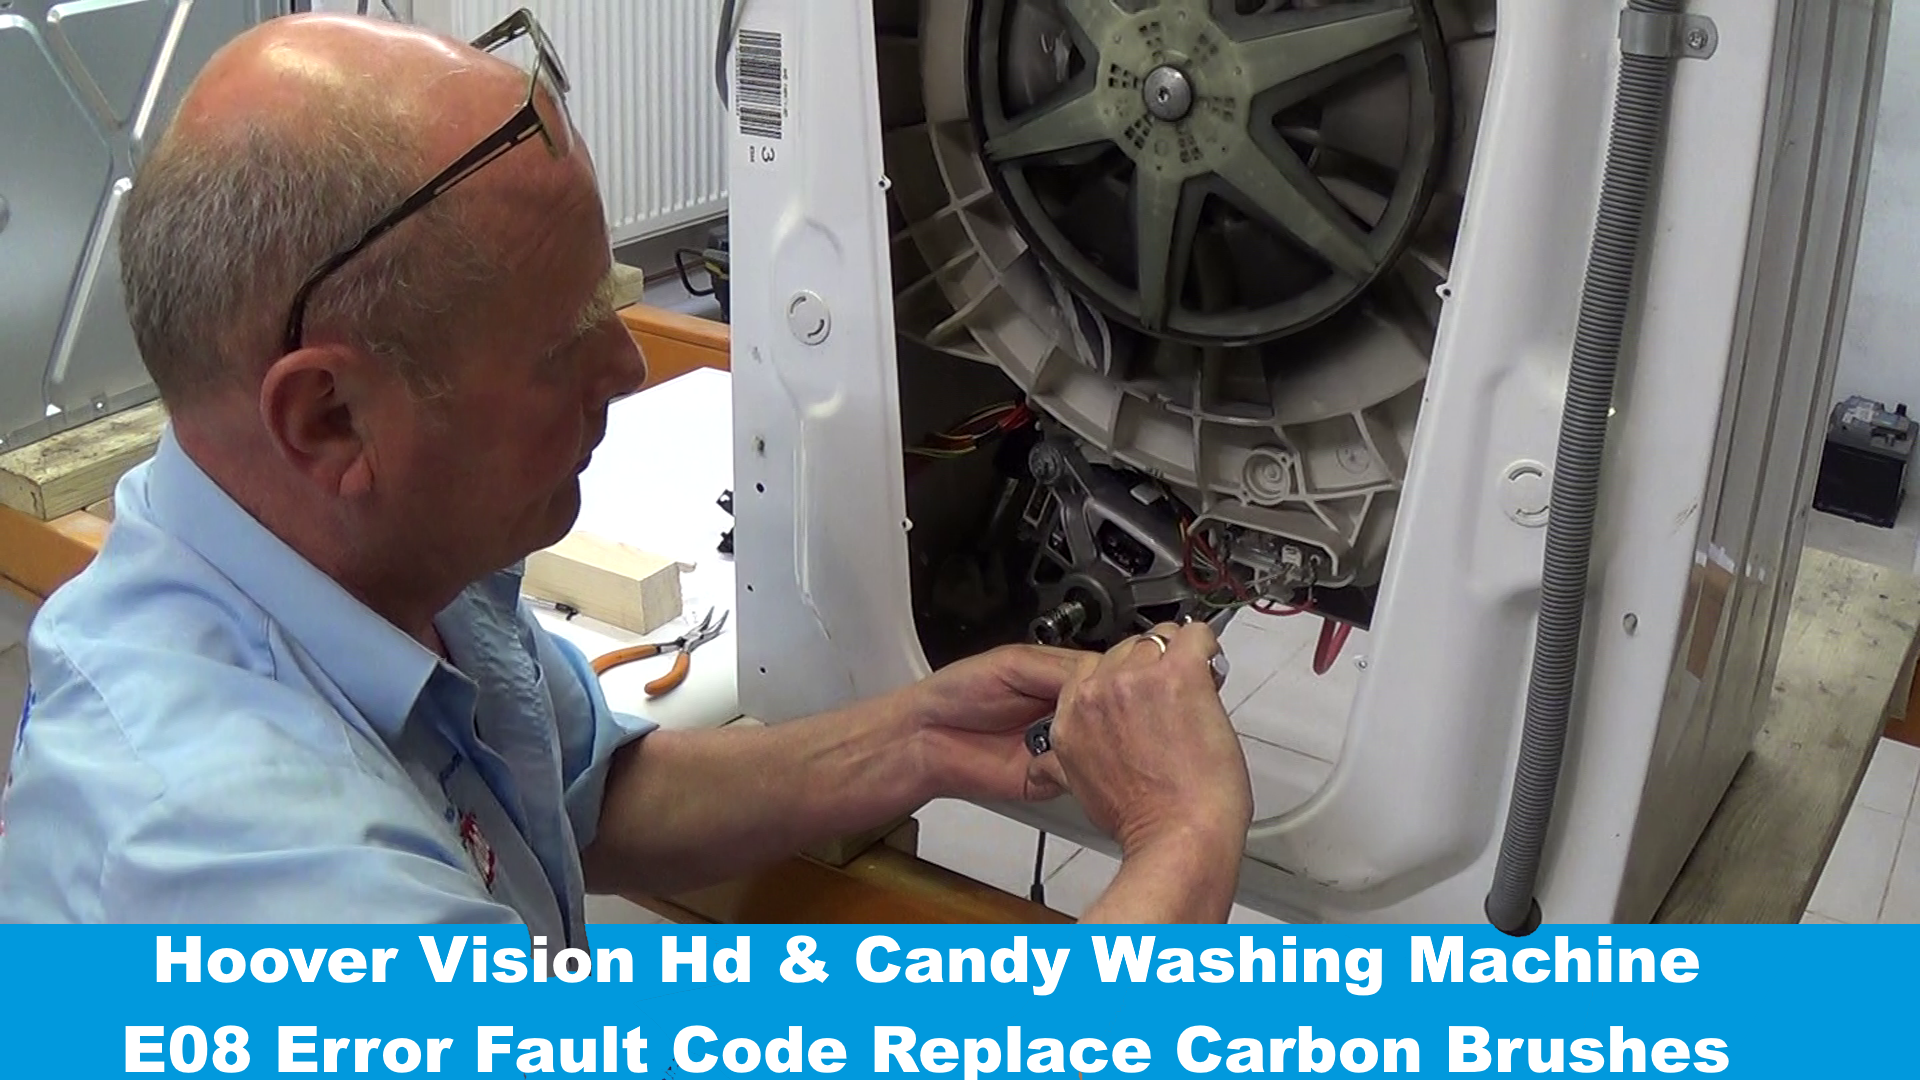 Hoover Vision Hd & Candy Washing Machine E08 Error Fault Code Replace Carbon Brushes